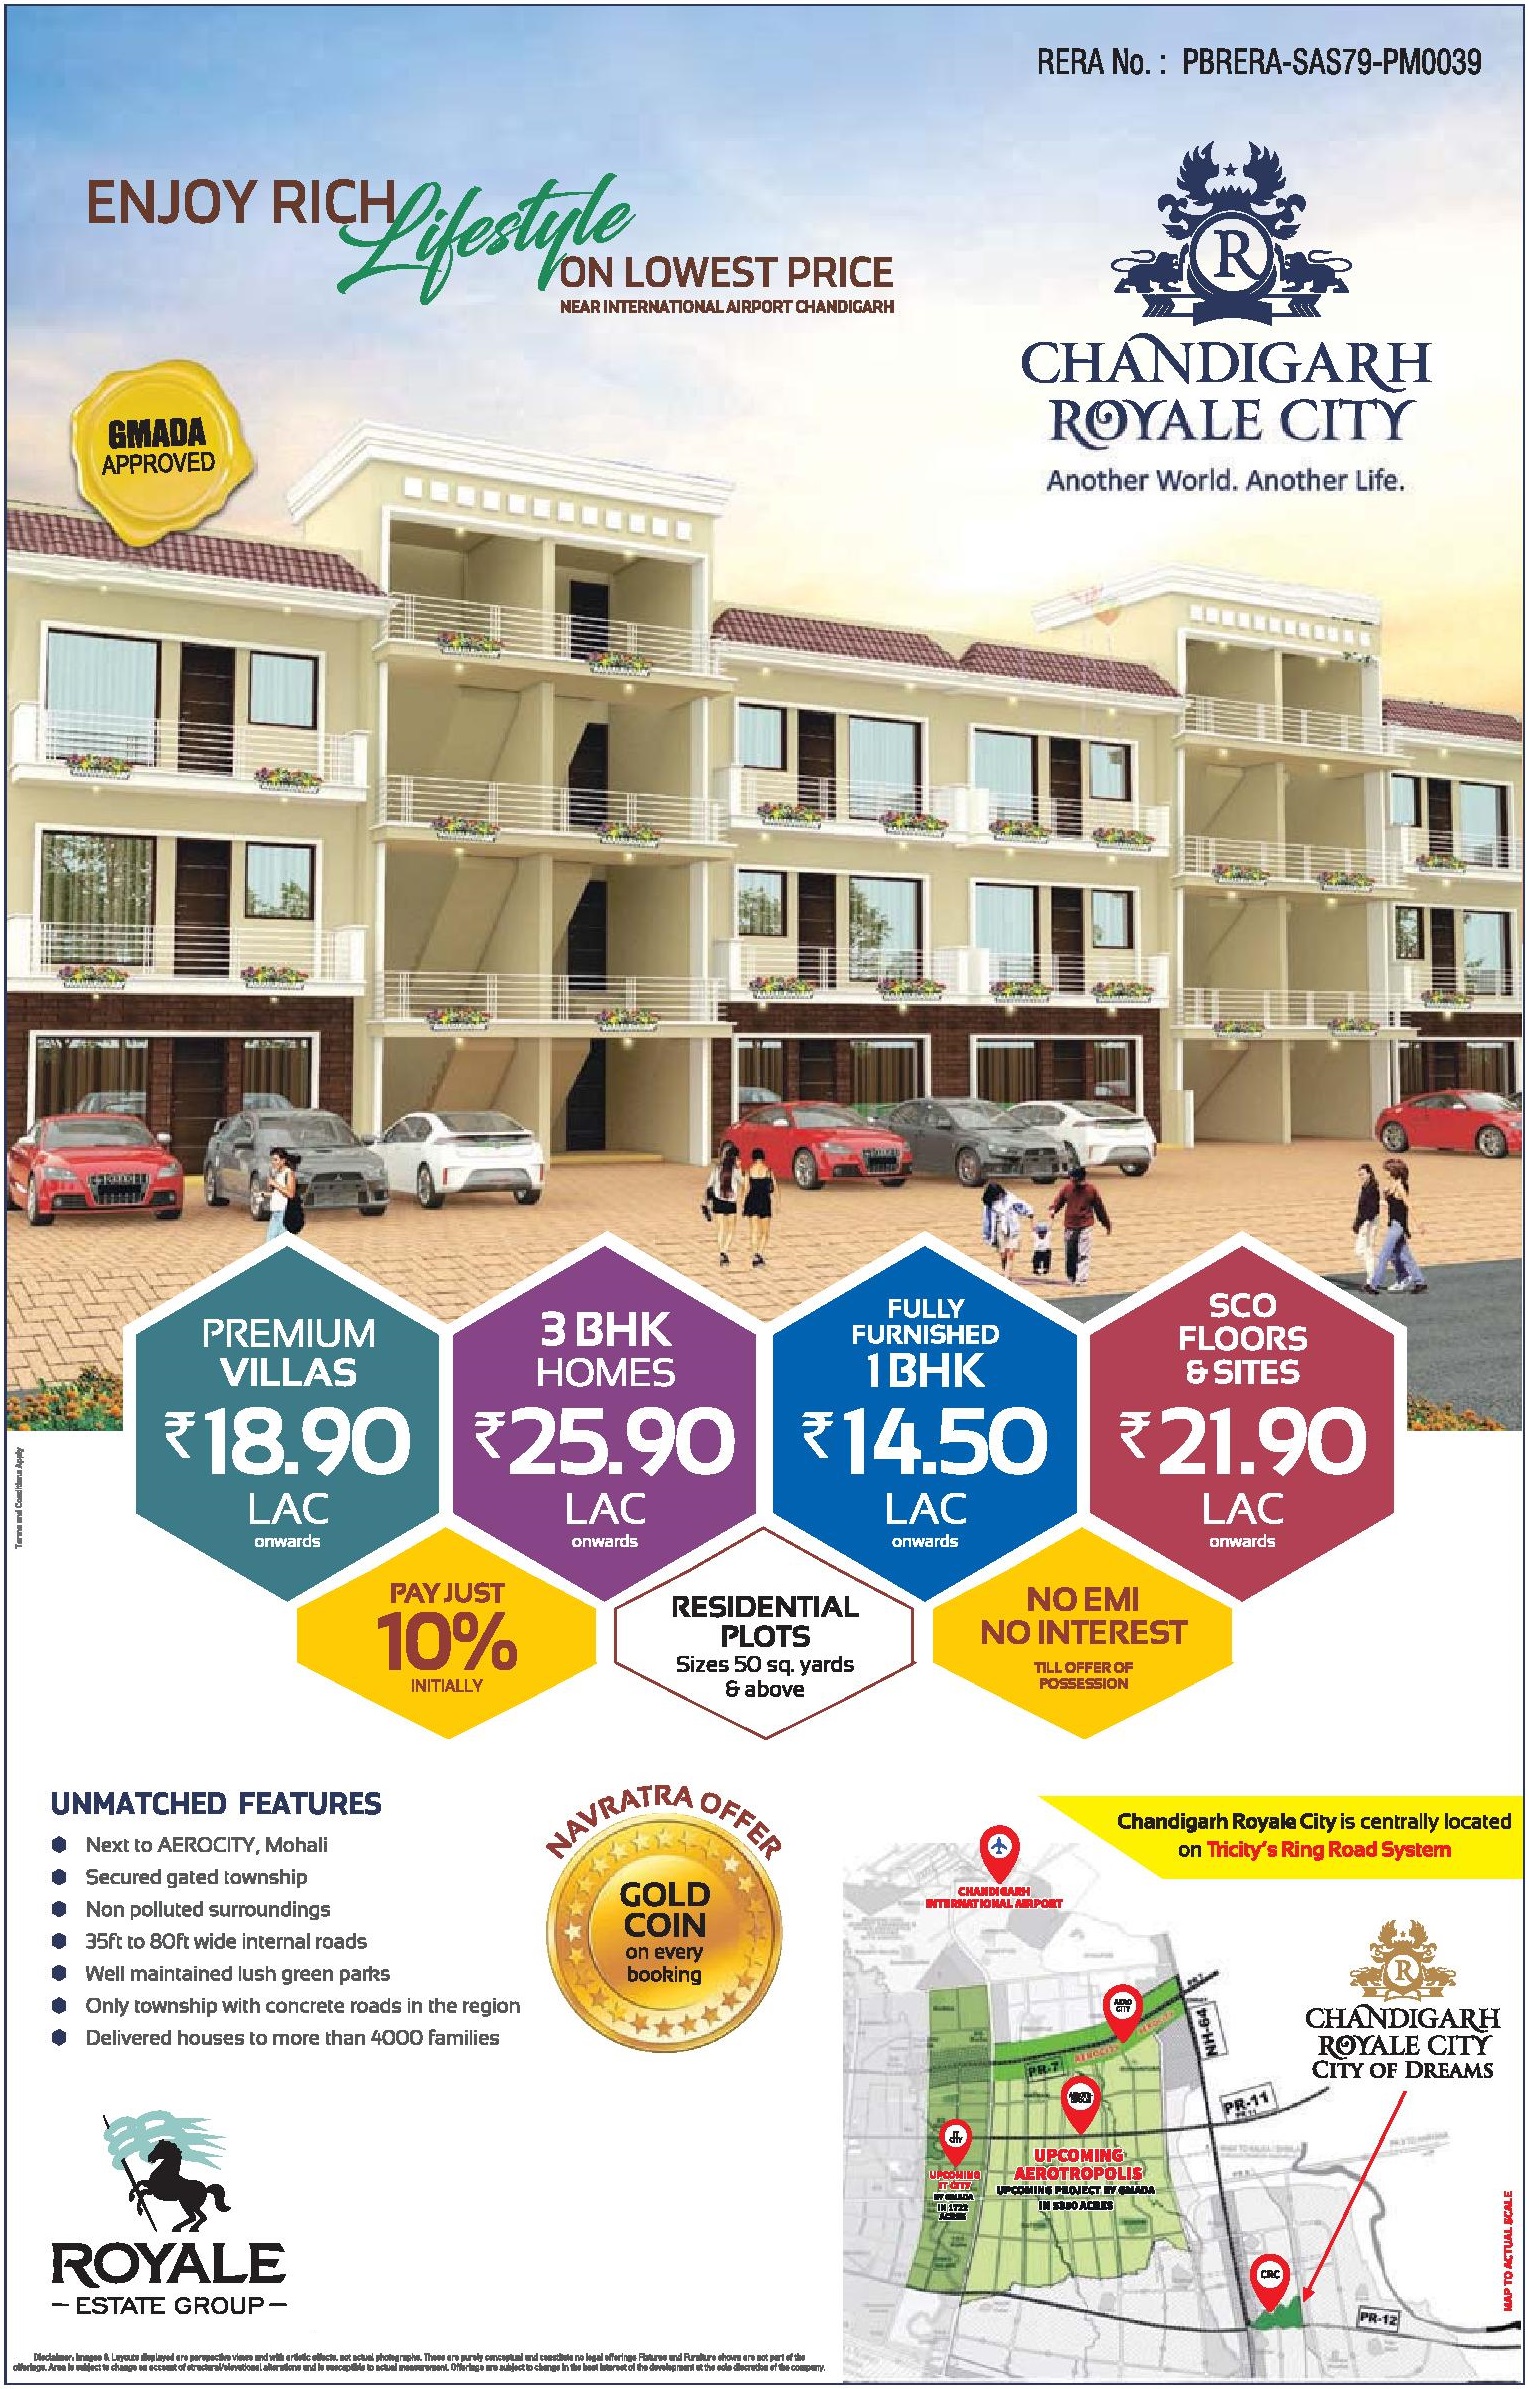 Pay no EMI & no interest till offer of possession at Chandigarh Royale City in Chandigarh